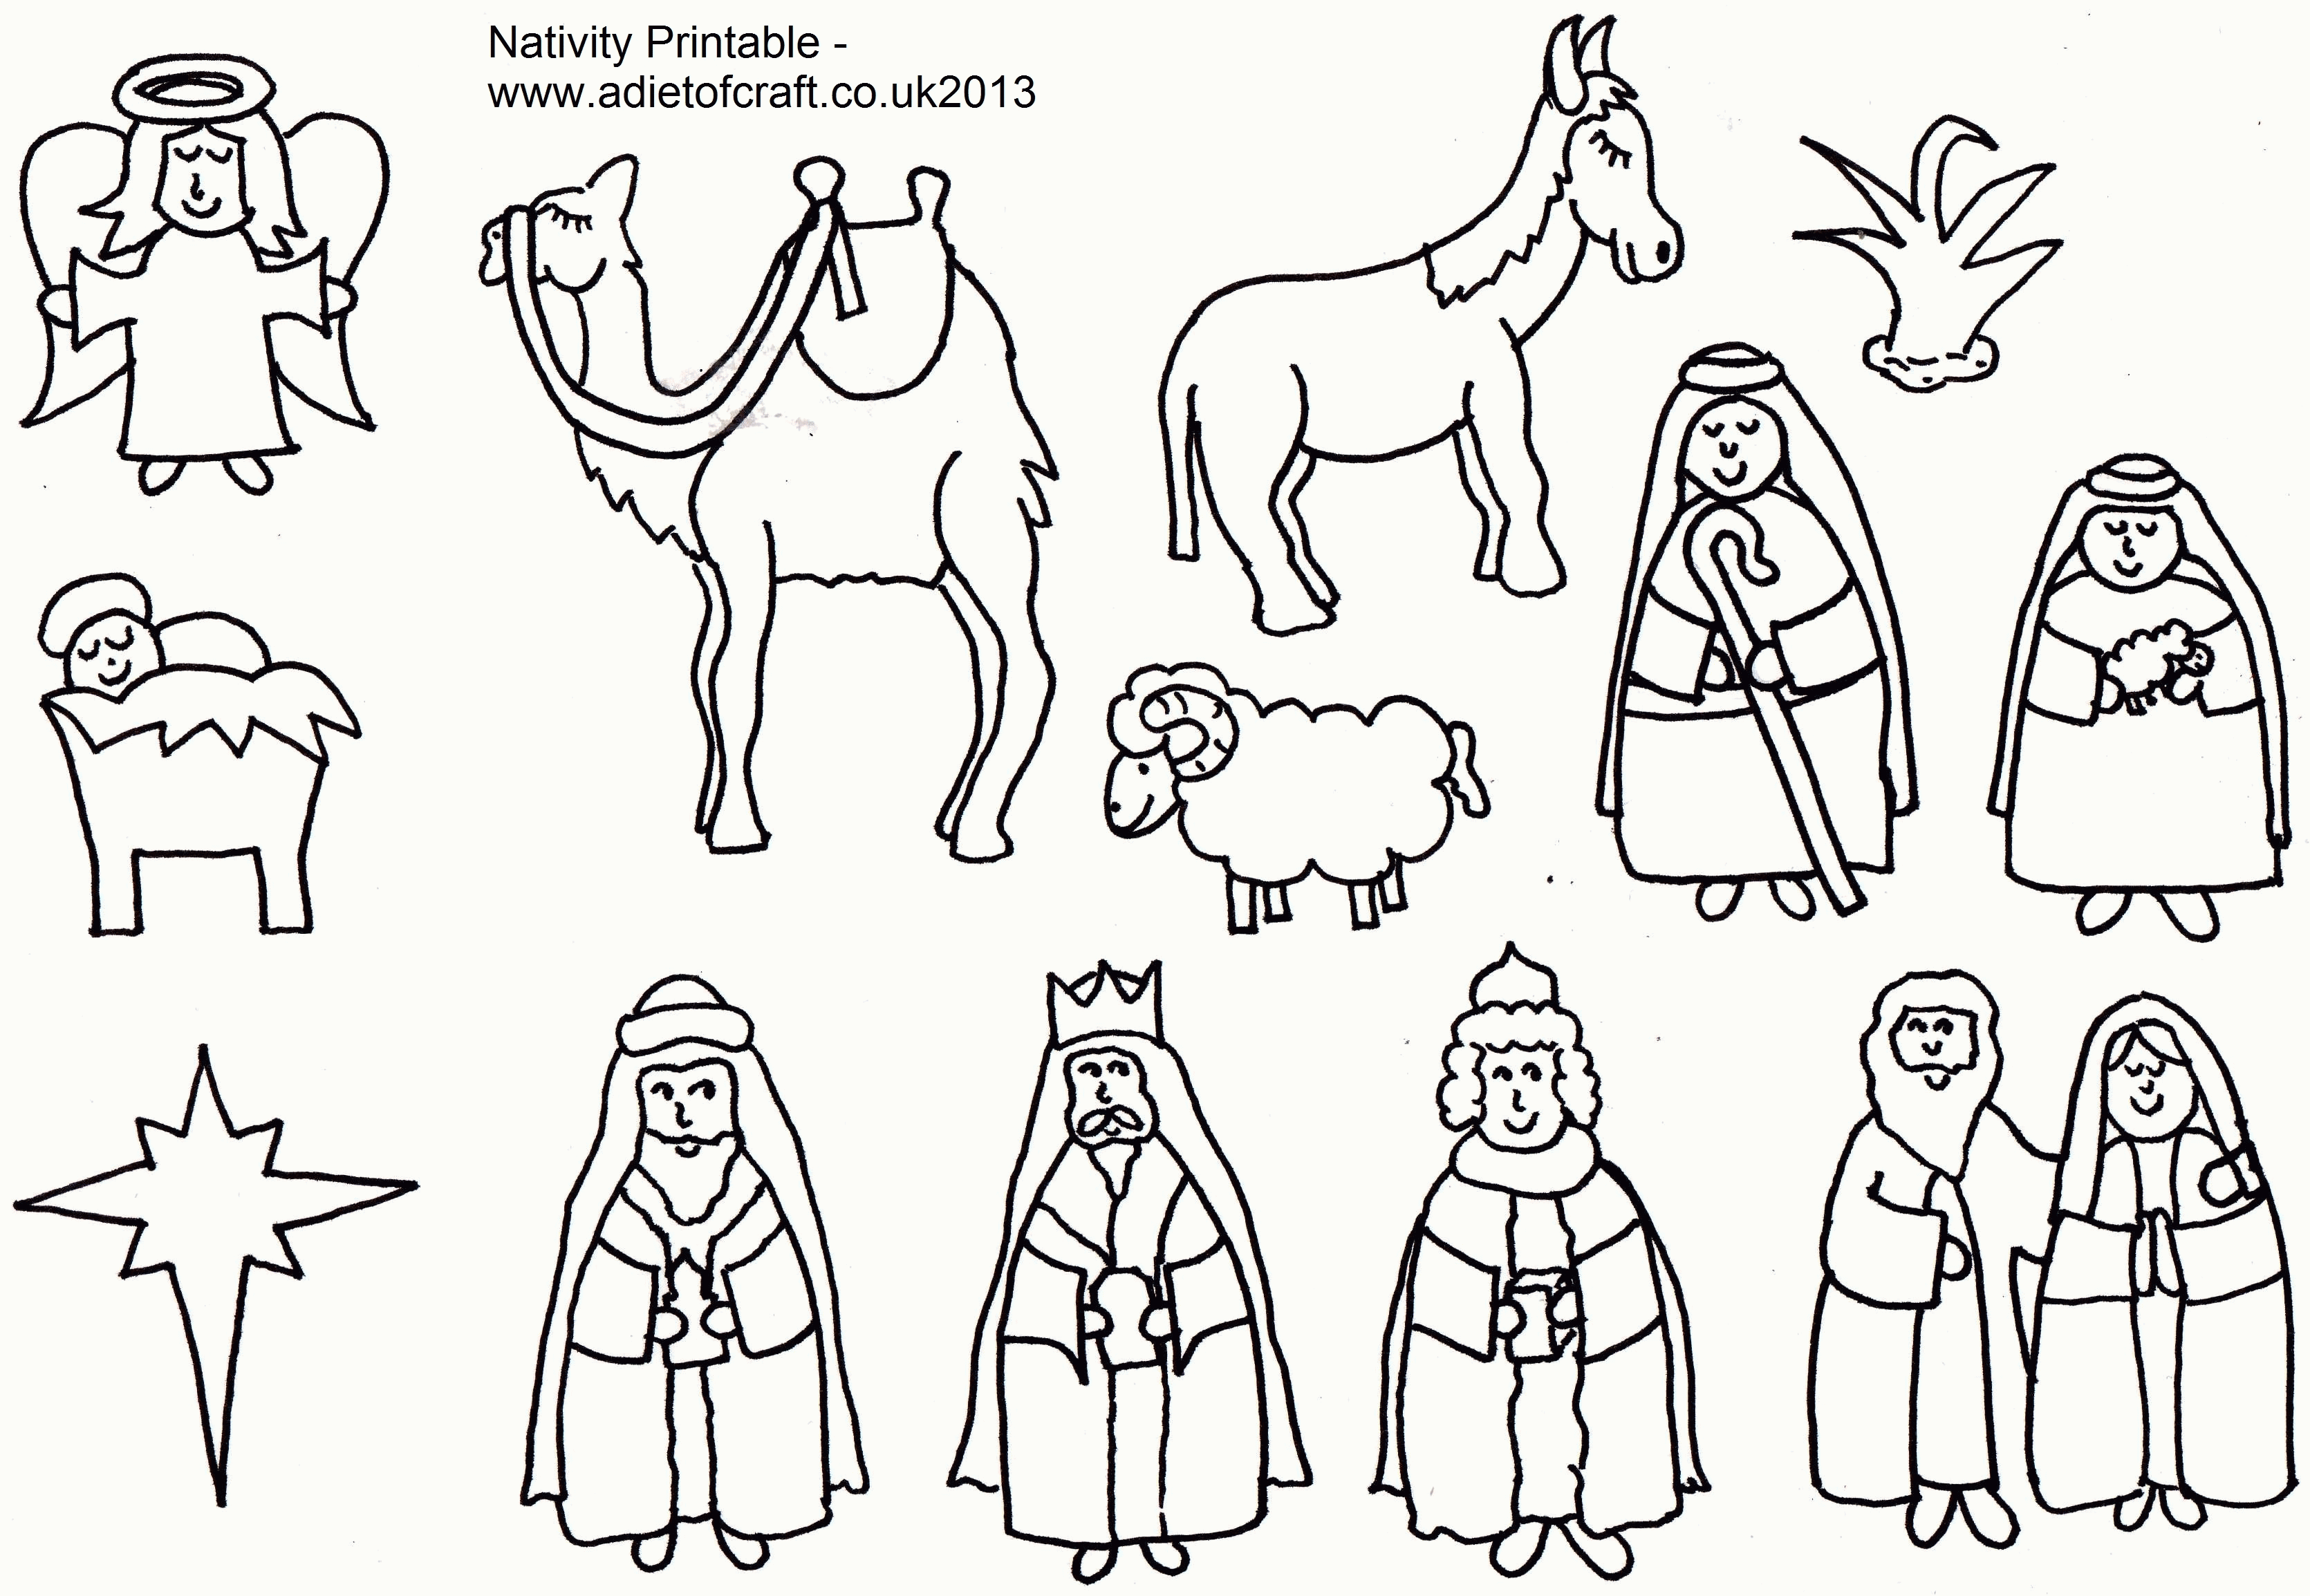 Christmas Nativity Coloring Pages To Print   Coloring Page ...